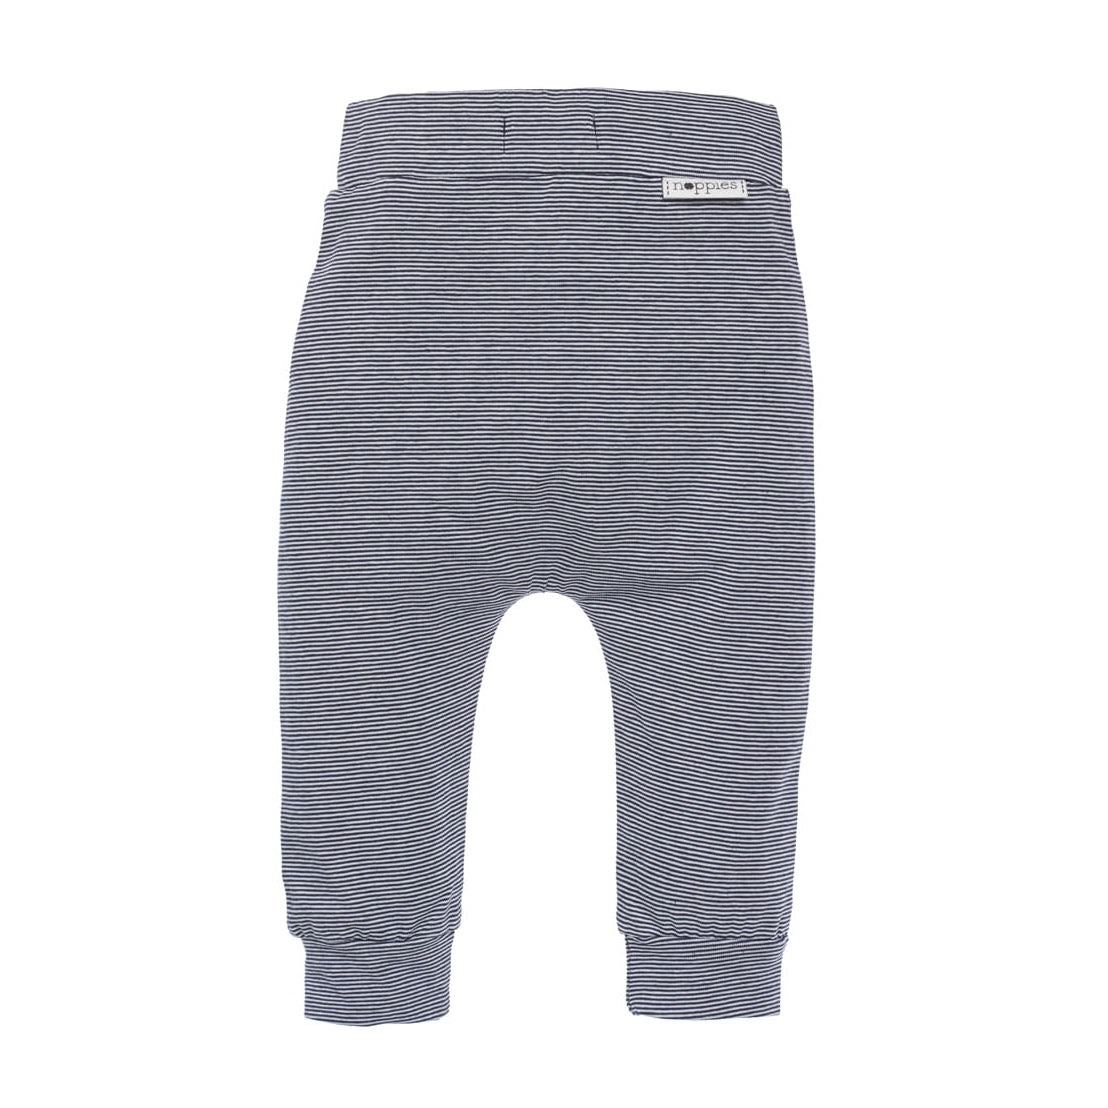 Noppies - Trousers Yip - Navy